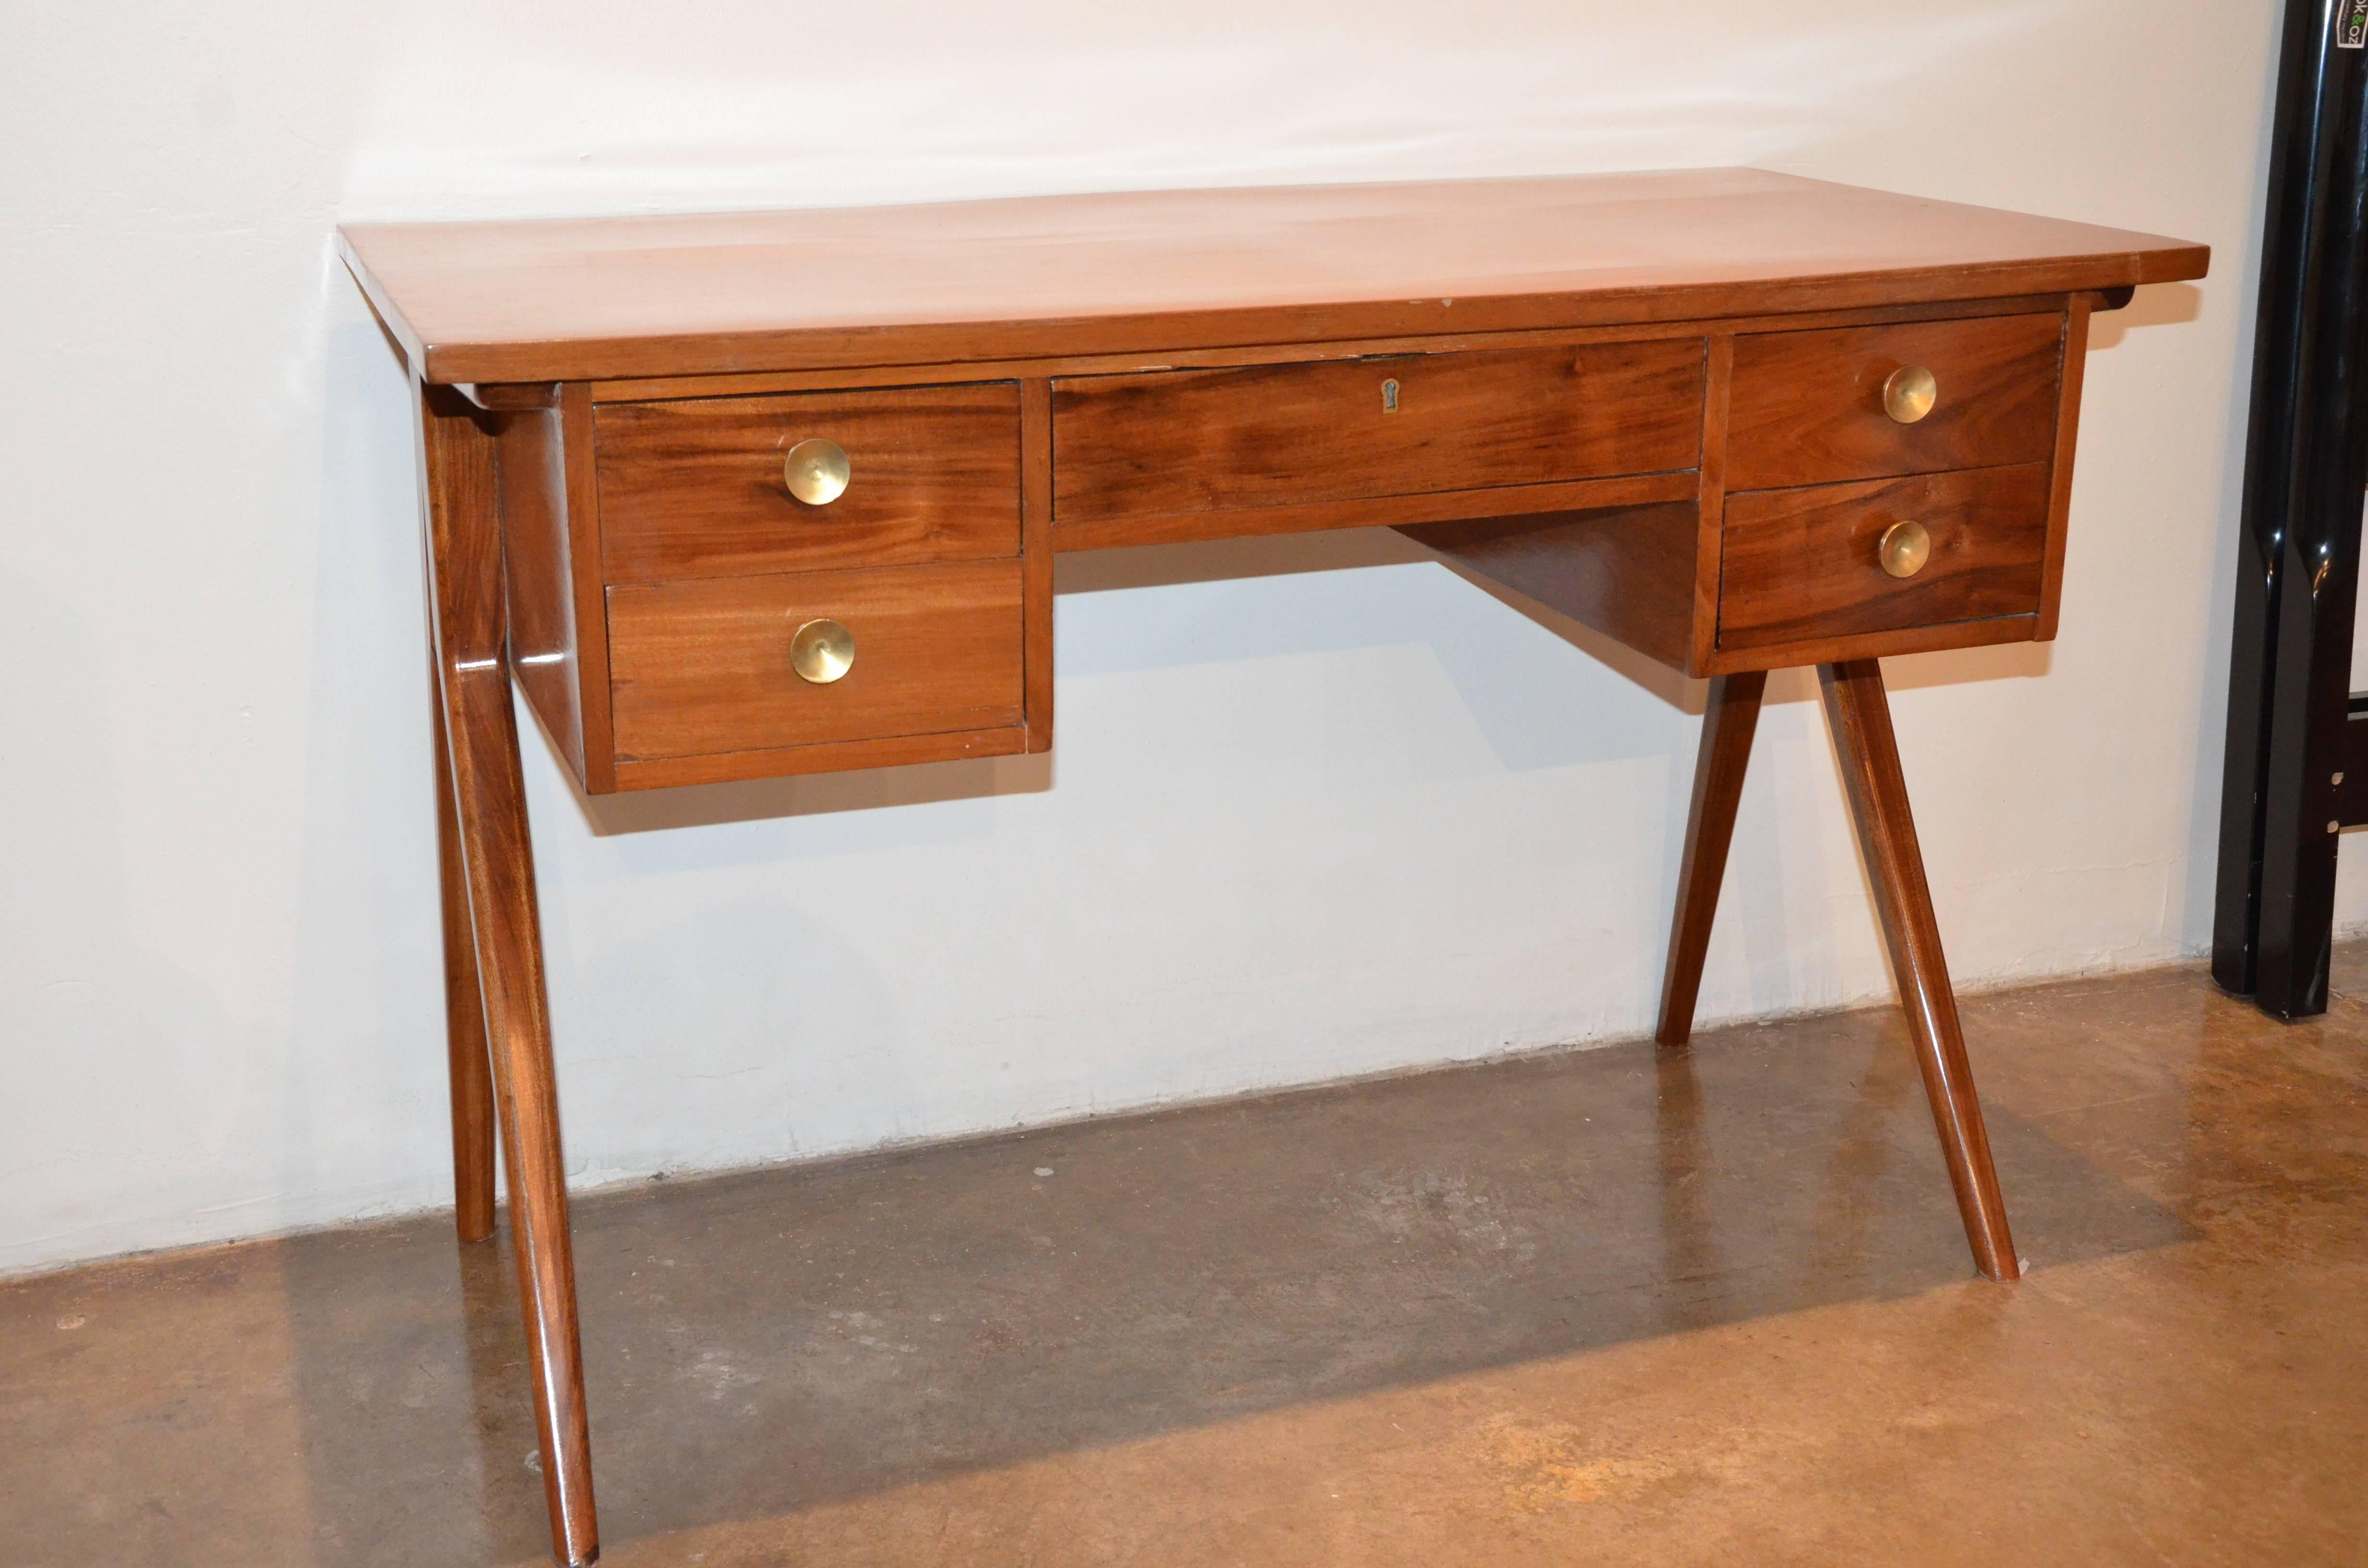 Offered is a mid century modern Argentinian desk or writing table with brass pulls. 
 This Argentinian gem is made from beautiful Argentinian Lignum Vitae wood and oversized brass pulls. This writing table has Classic Mid-Century lines that would